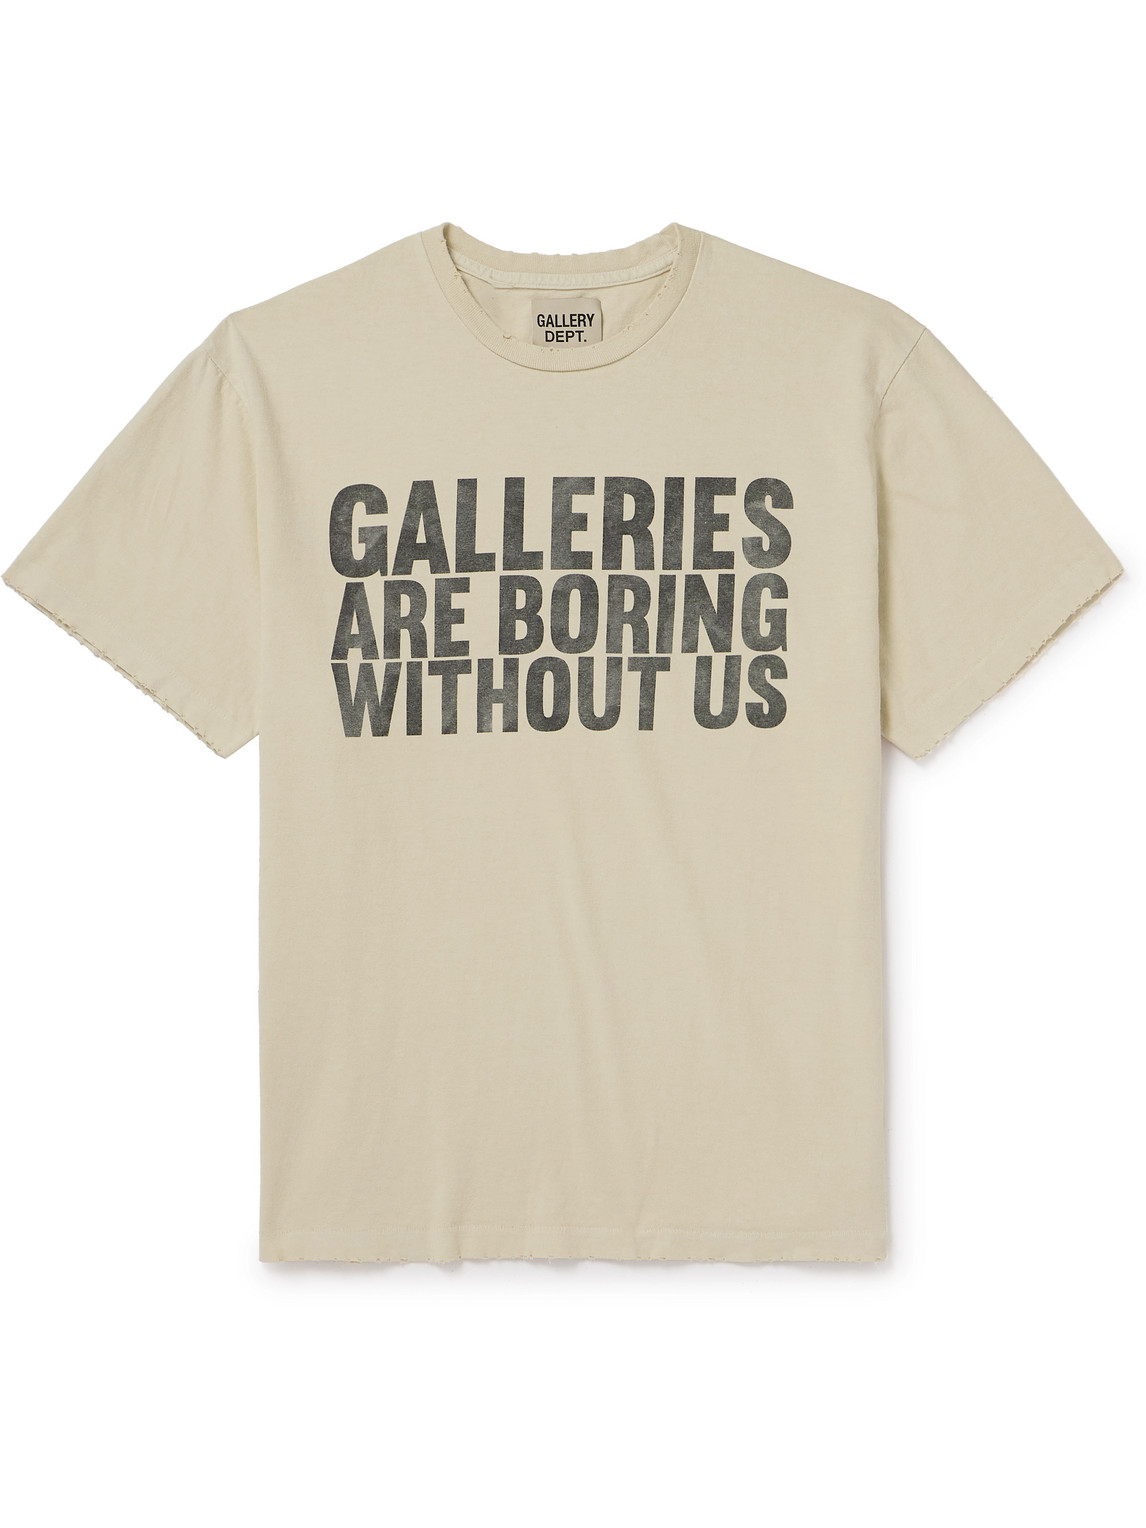 GALLERY DEPT. BORING DISTRESSED PRINTED COTTON-JERSEY T-SHIRT